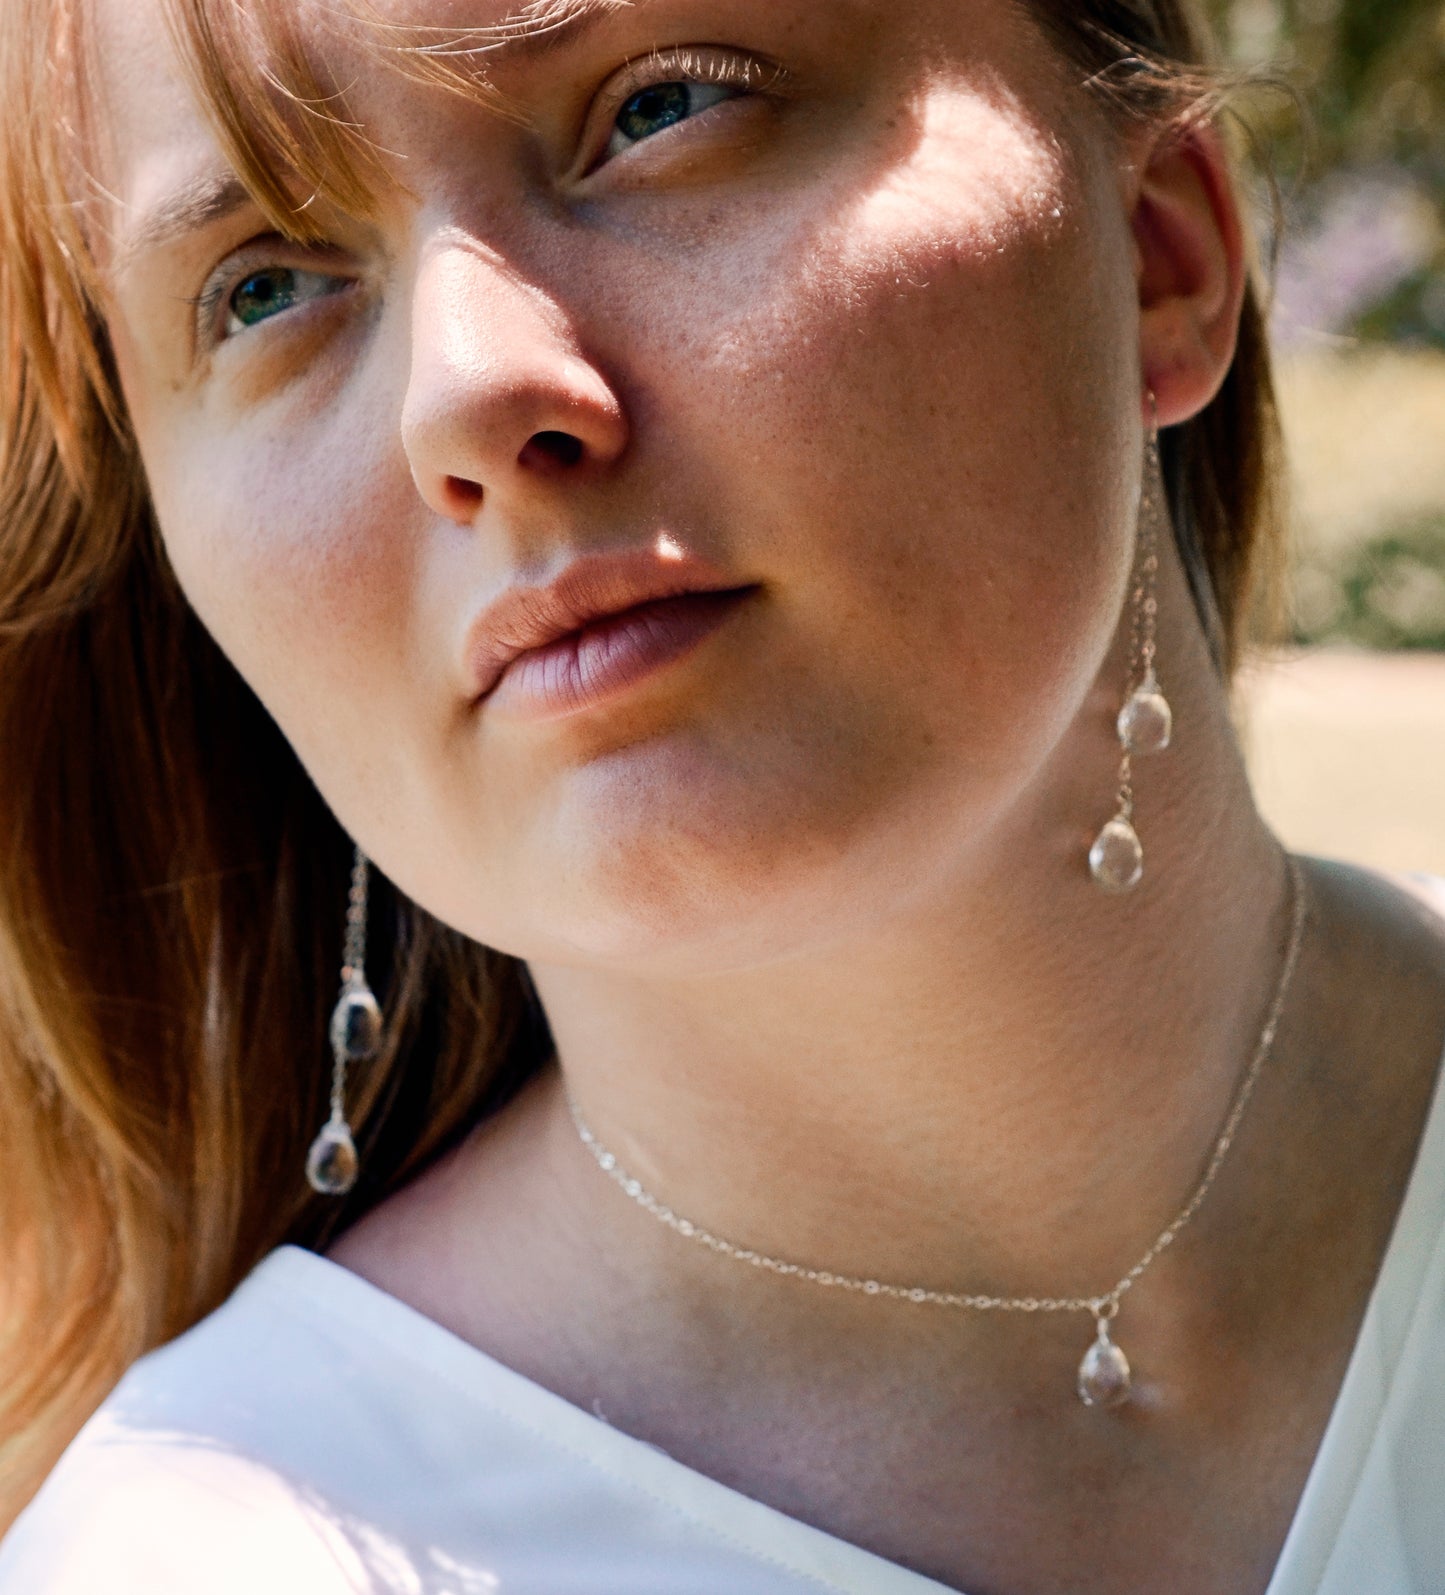 Long clear crystal quartz earrings with two teardrop dangles hanging from a dainty chain. Shown in sterling silver.